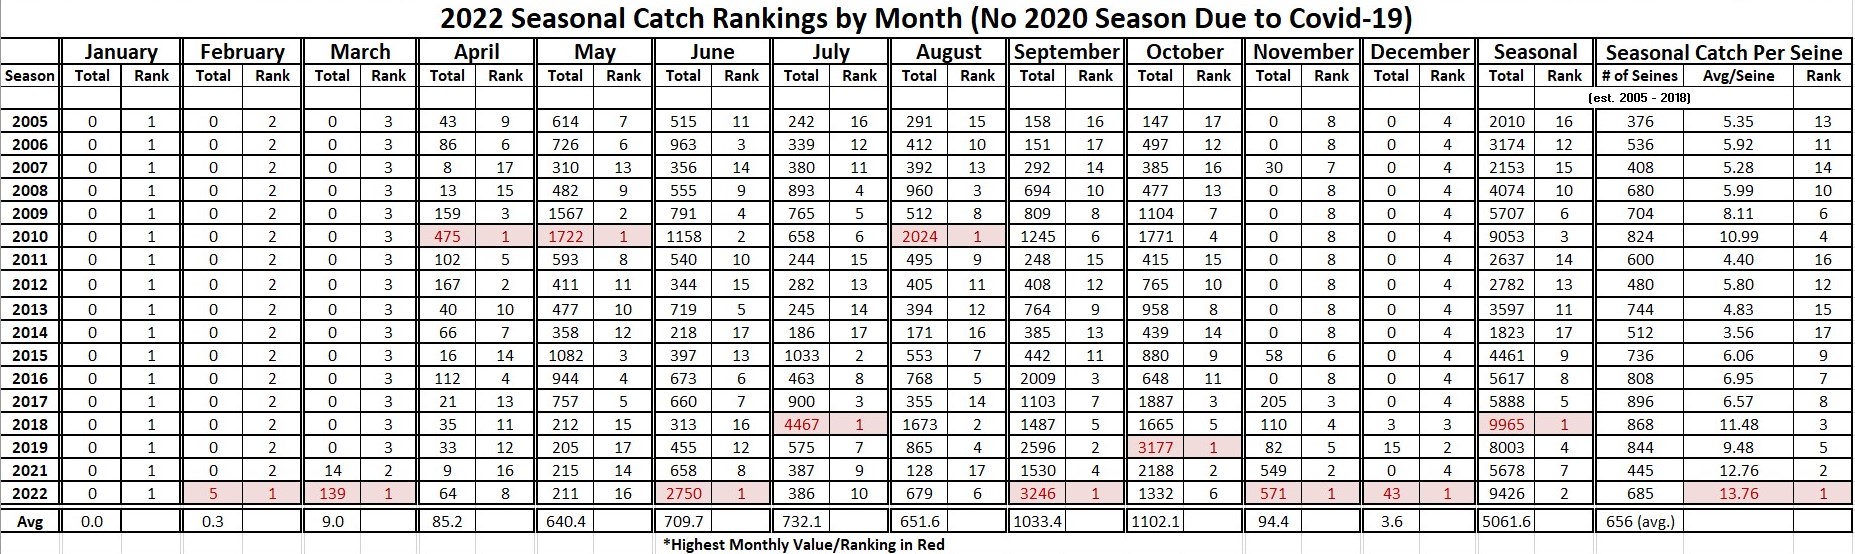 monthly catch totals